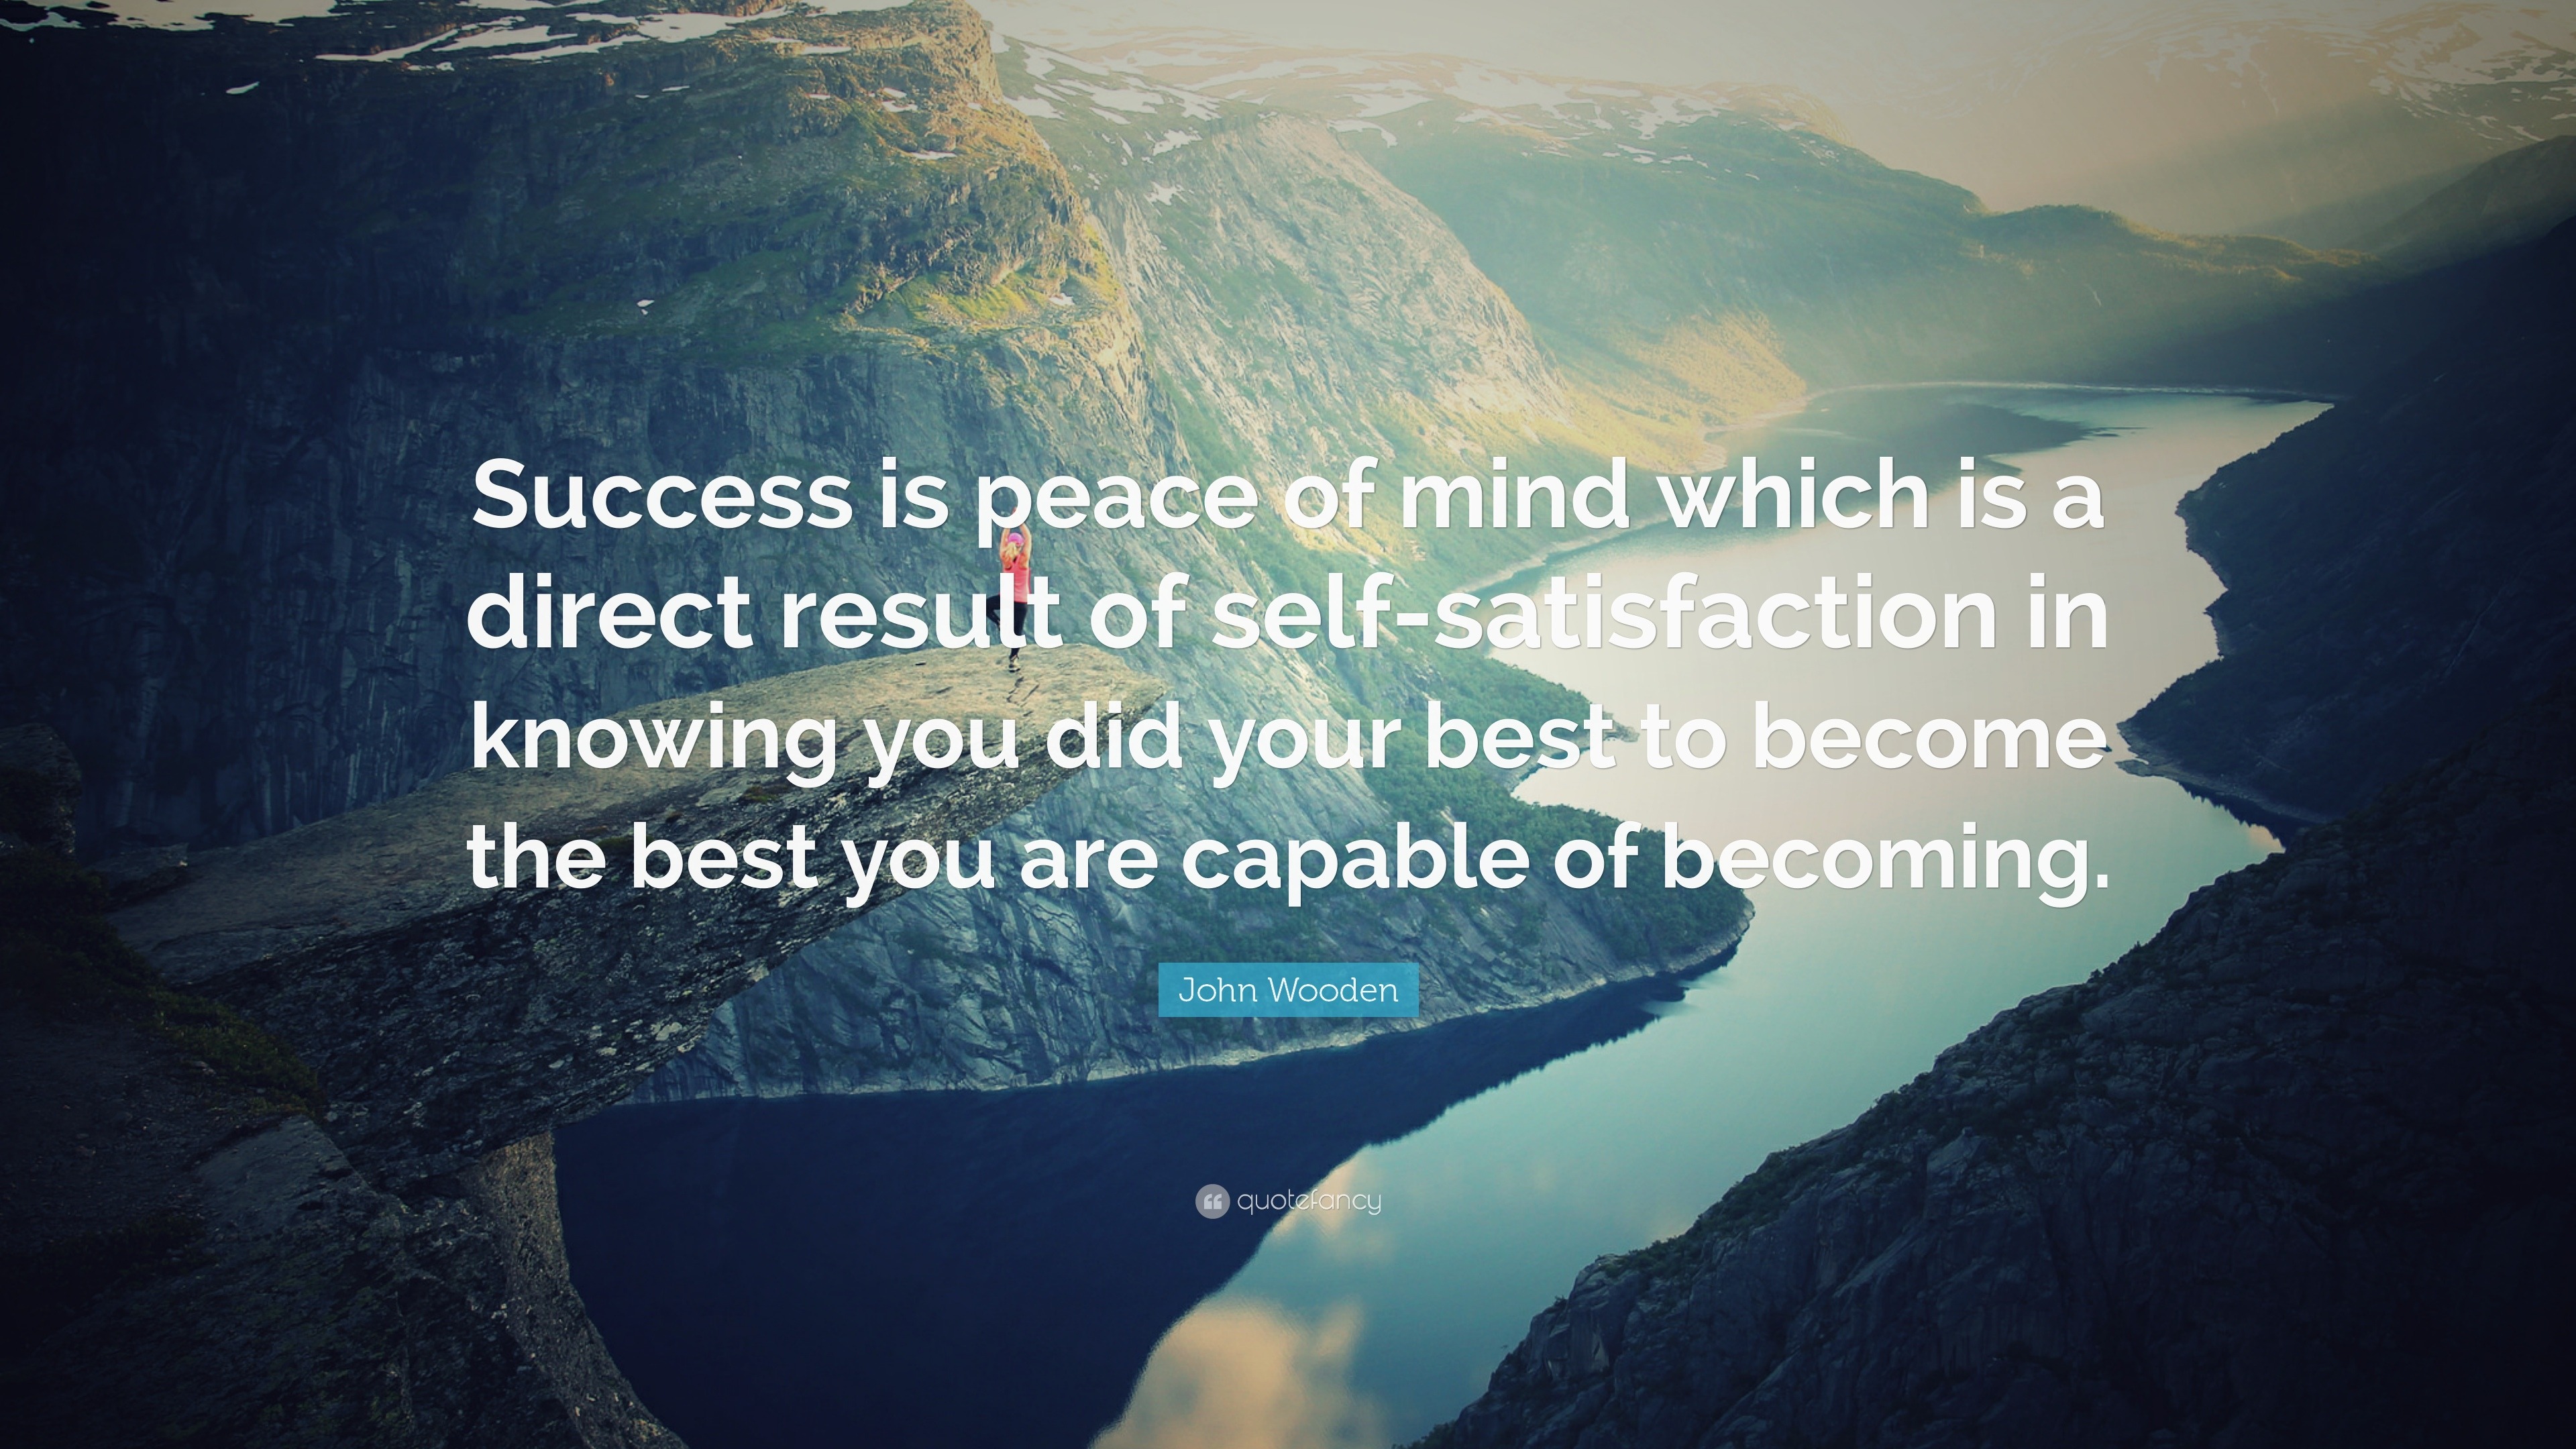 John Wooden Quote: "Success is peace of mind which is a ...